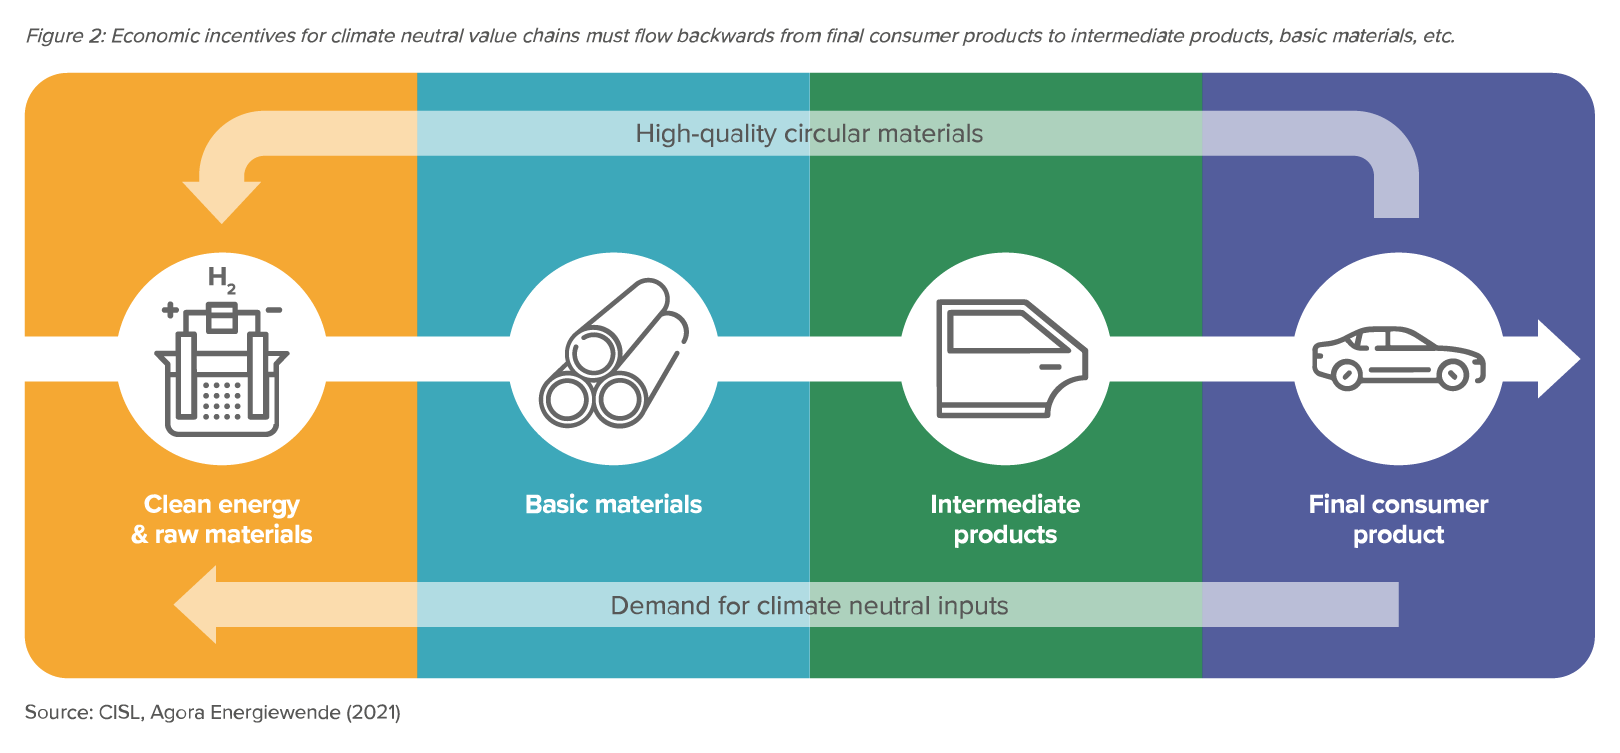 Preview for Economic incentives for climate neutral value chains must flow backwards from final consumer products to intermediate products, basic materials, etc.